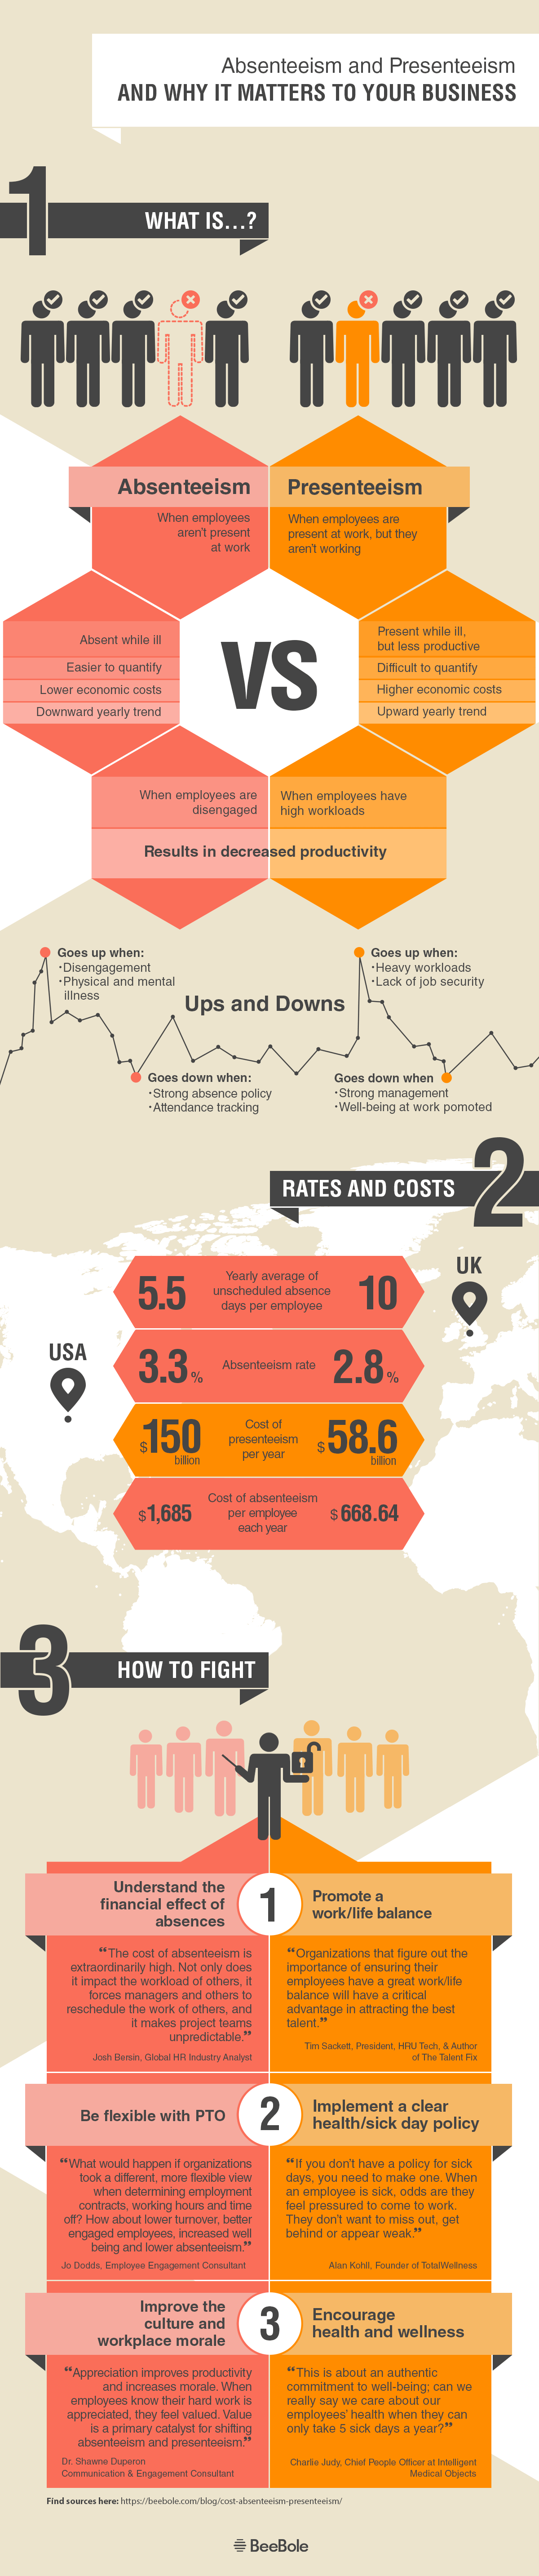 An infographic depicting the costs of workplace absenteeism and presenteeism in both the US and UK.